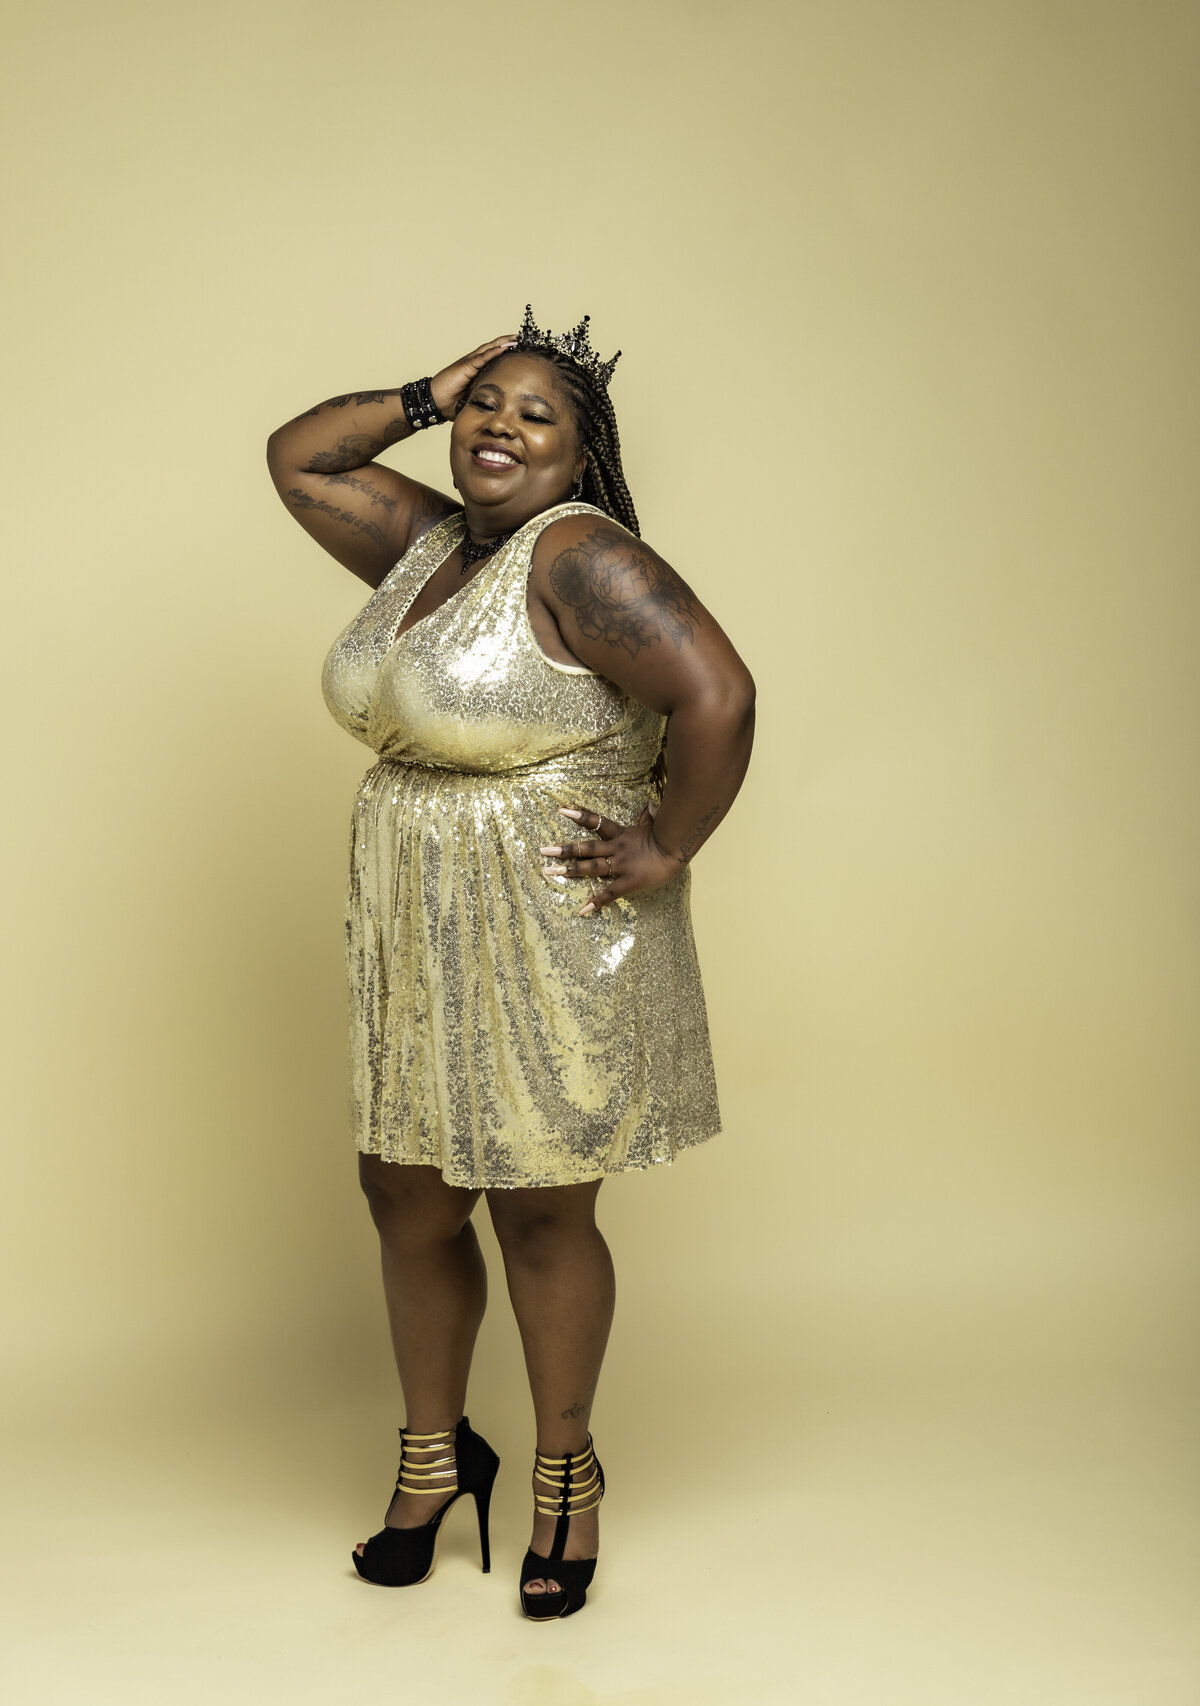 Plus size Black woman in a gold dress, black heels, and black crown